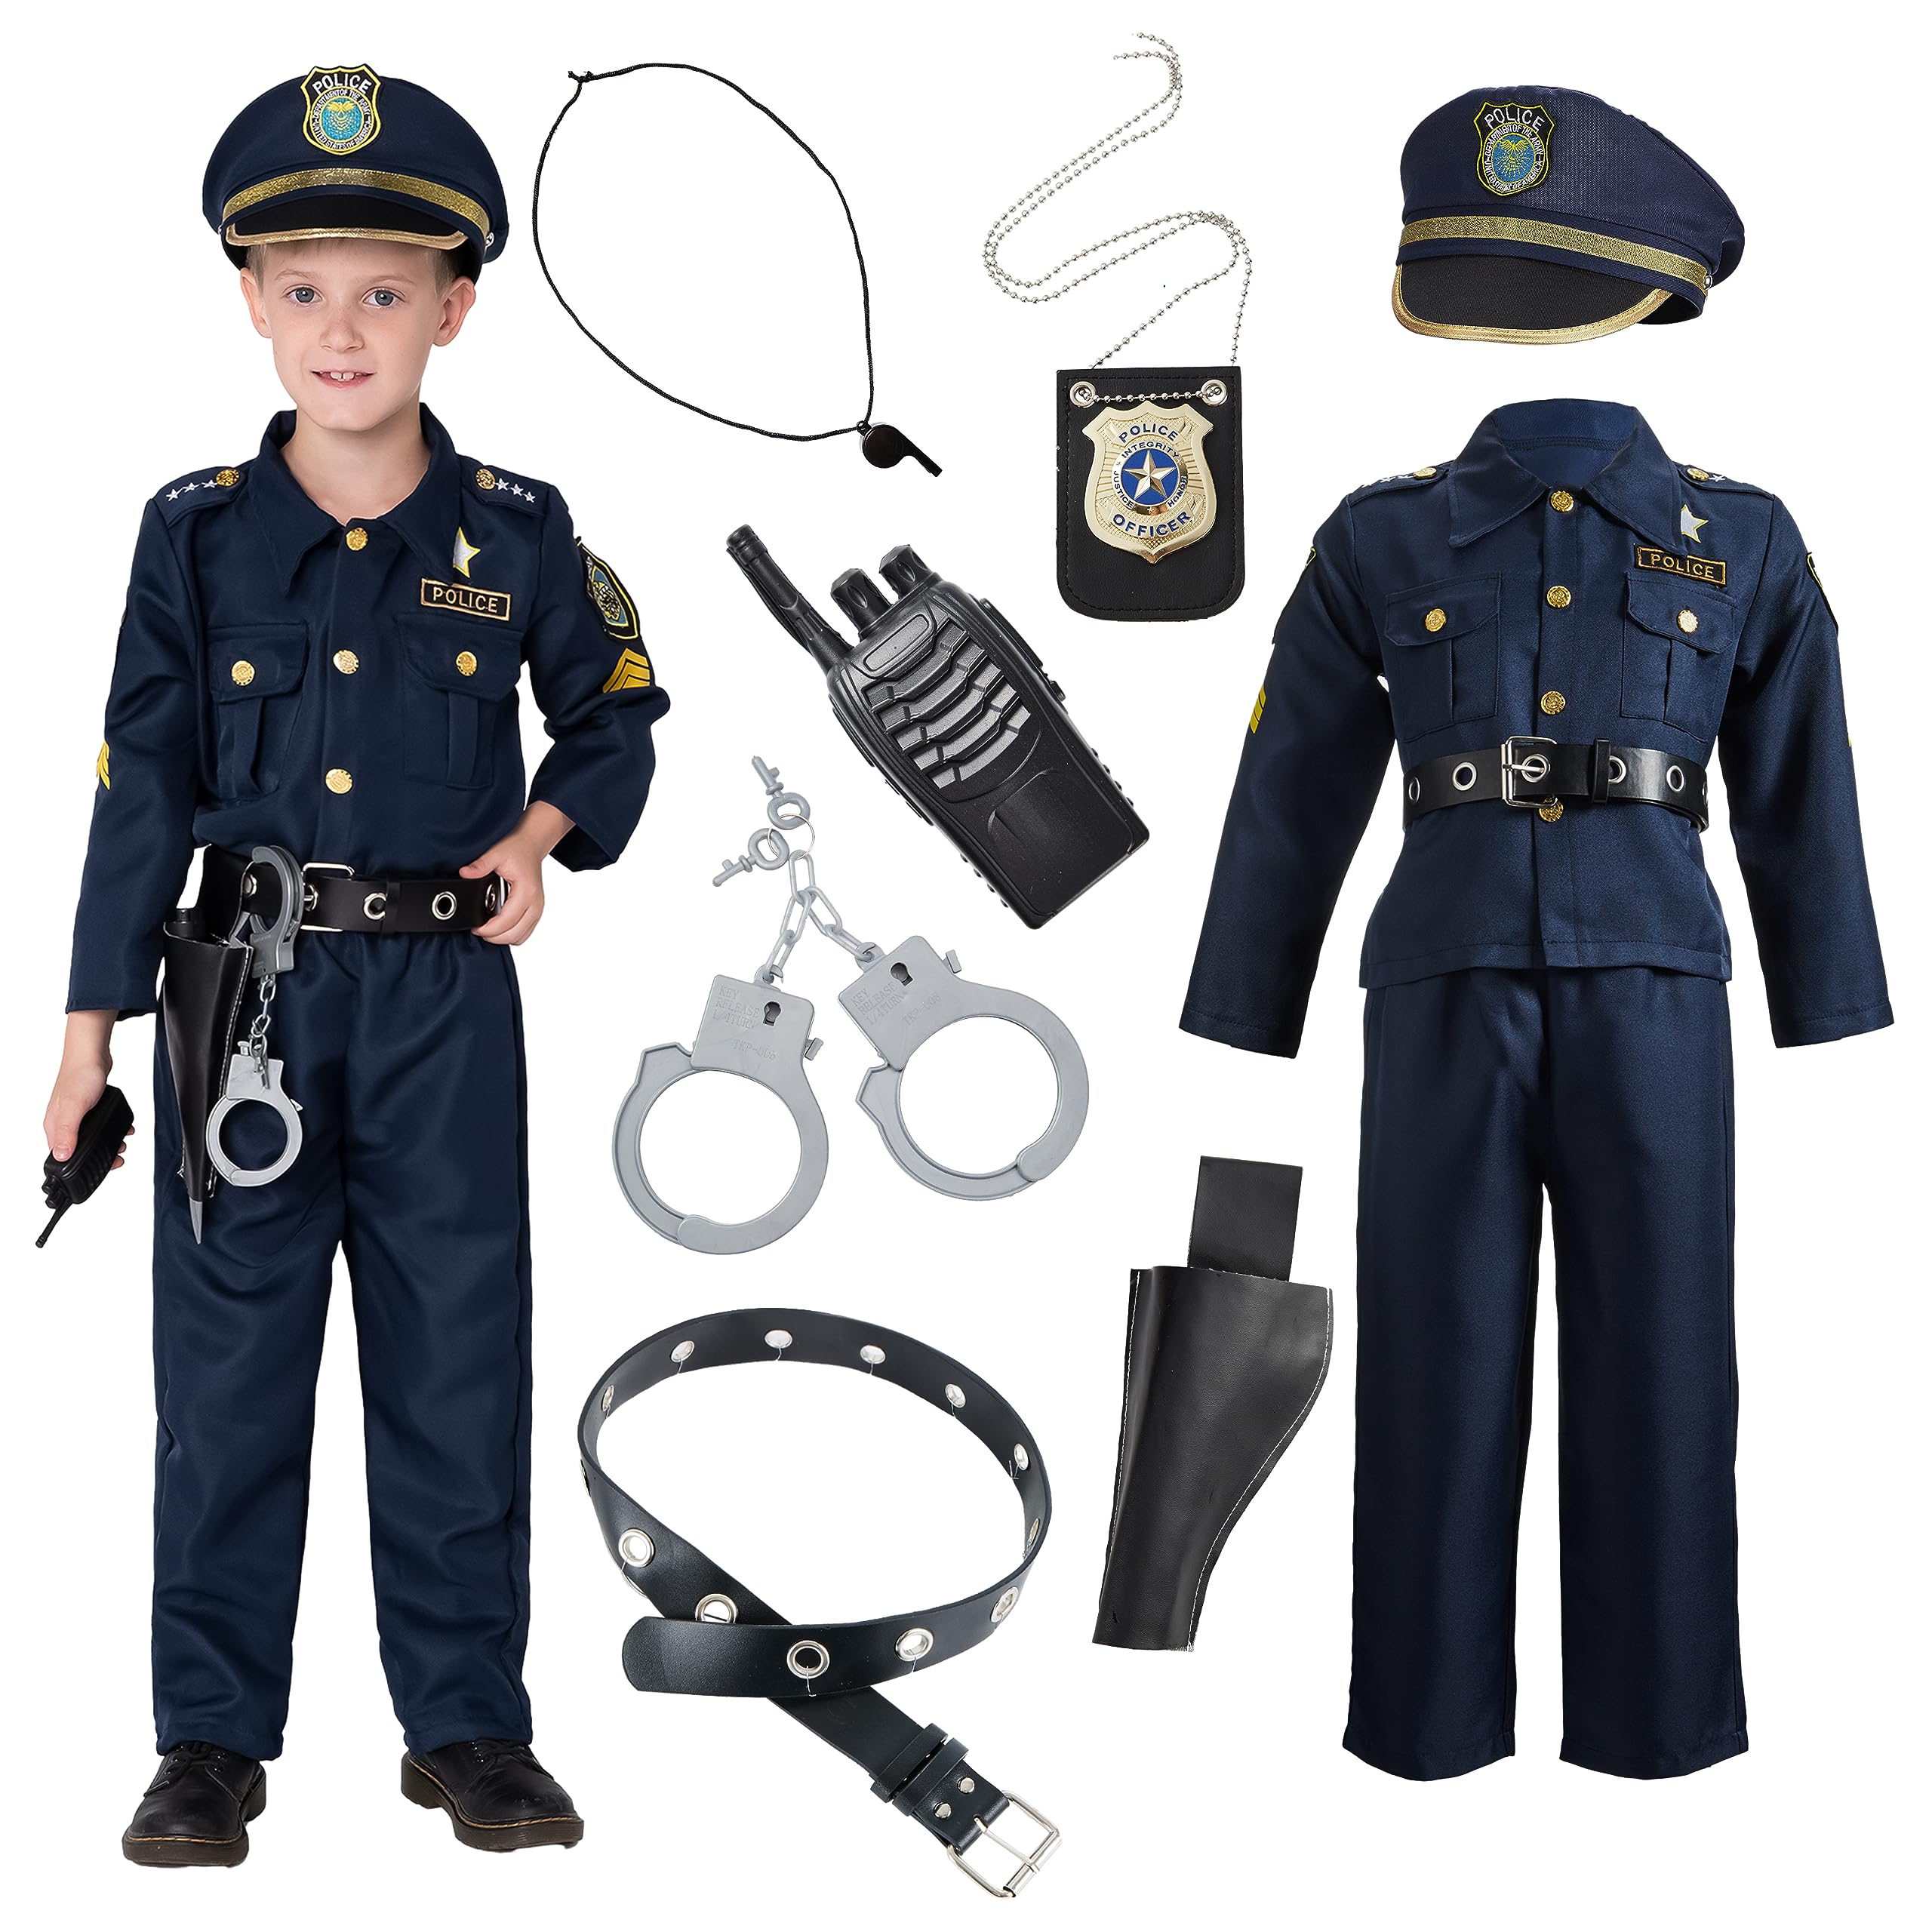 JOYIN Toy Deluxe Police Officer Costume and Role Play Kit for Kids Halloween Cosplay (Toddler)